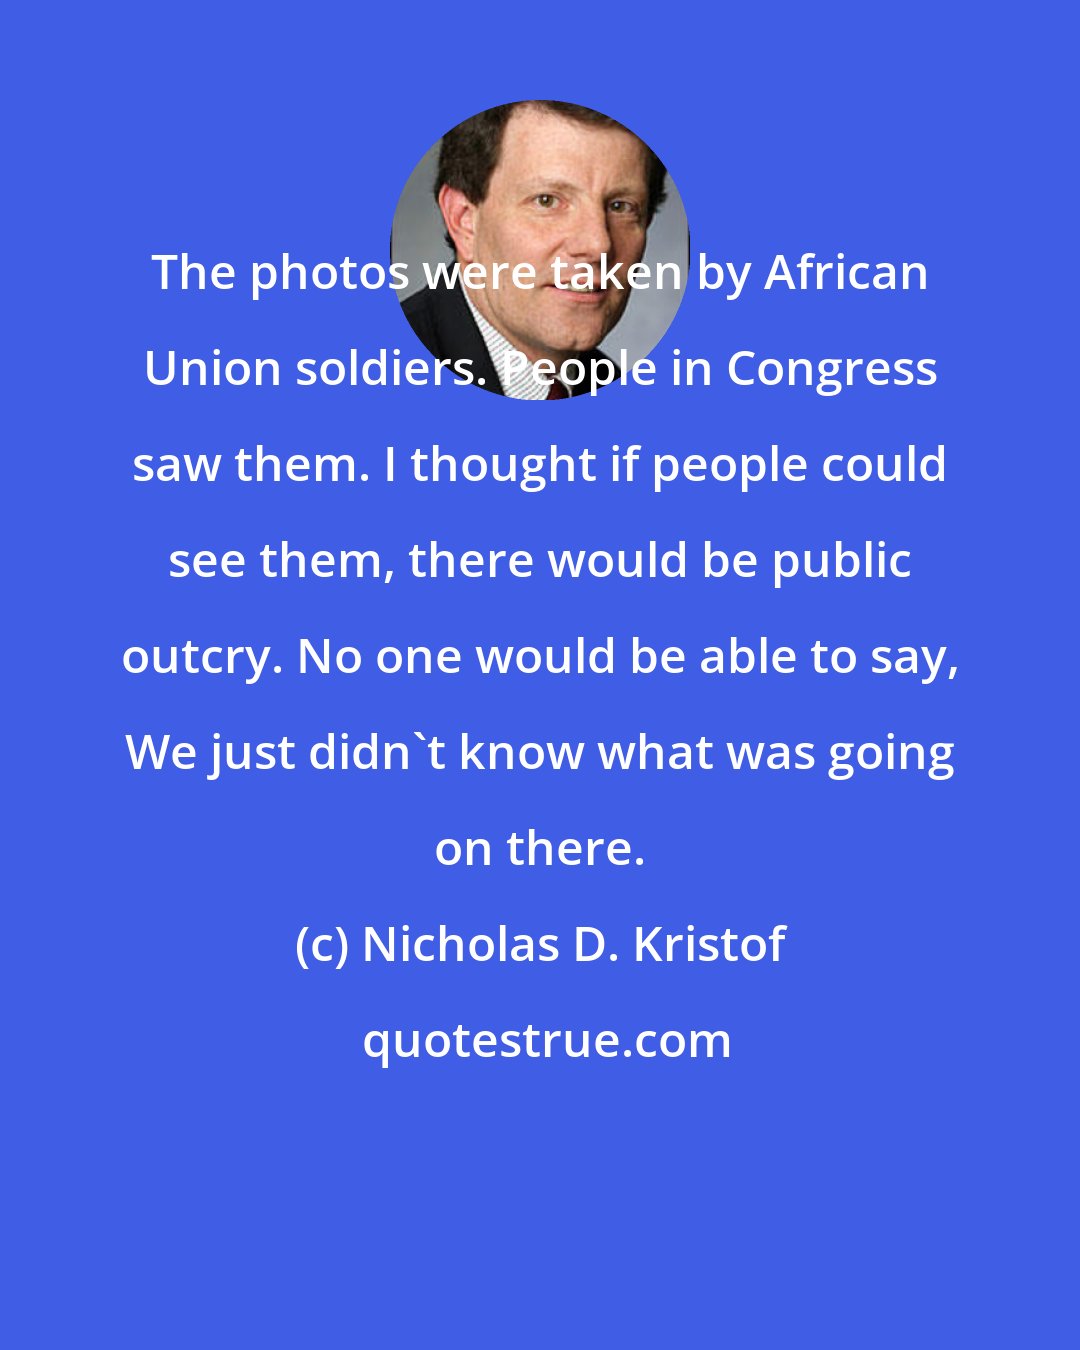 Nicholas D. Kristof: The photos were taken by African Union soldiers. People in Congress saw them. I thought if people could see them, there would be public outcry. No one would be able to say, We just didn't know what was going on there.